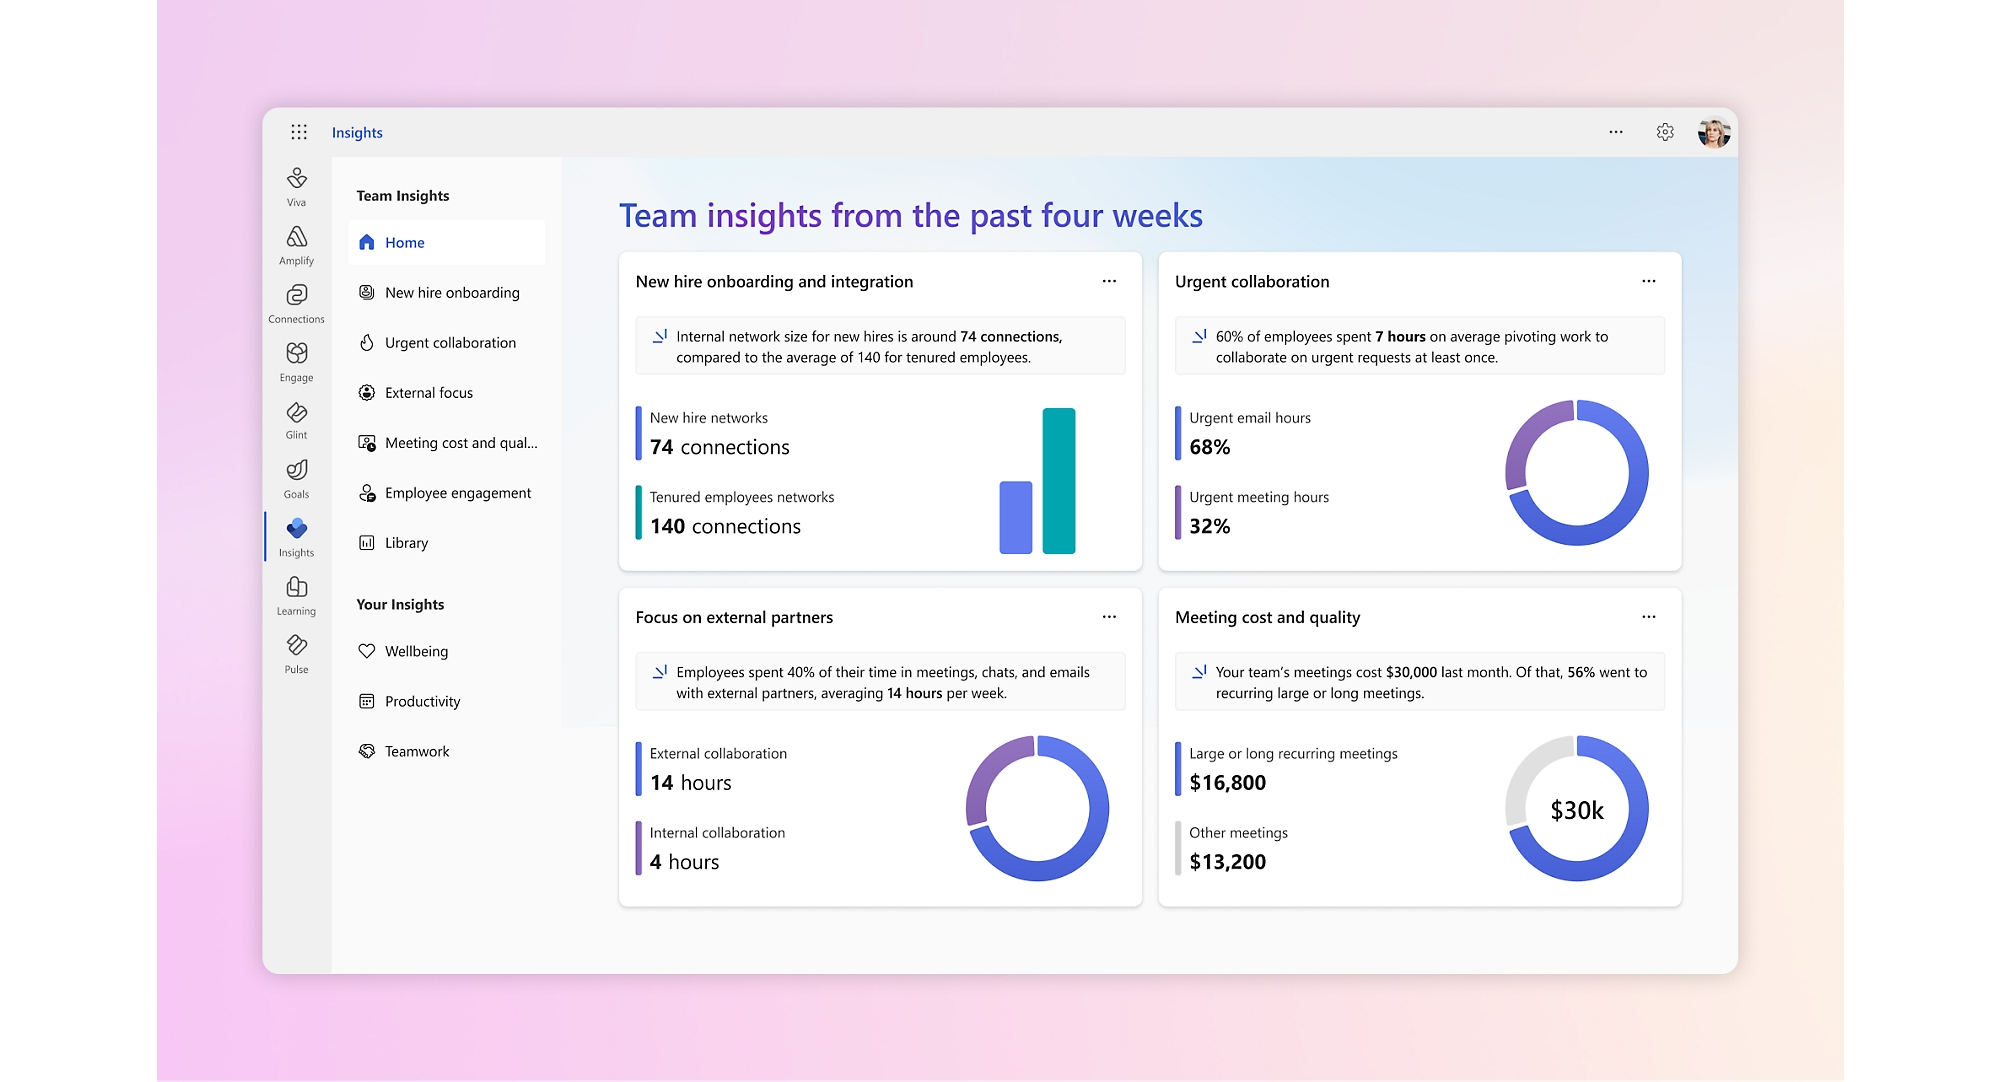 Dashboard displaying team insights from the past four weeks, including metrics